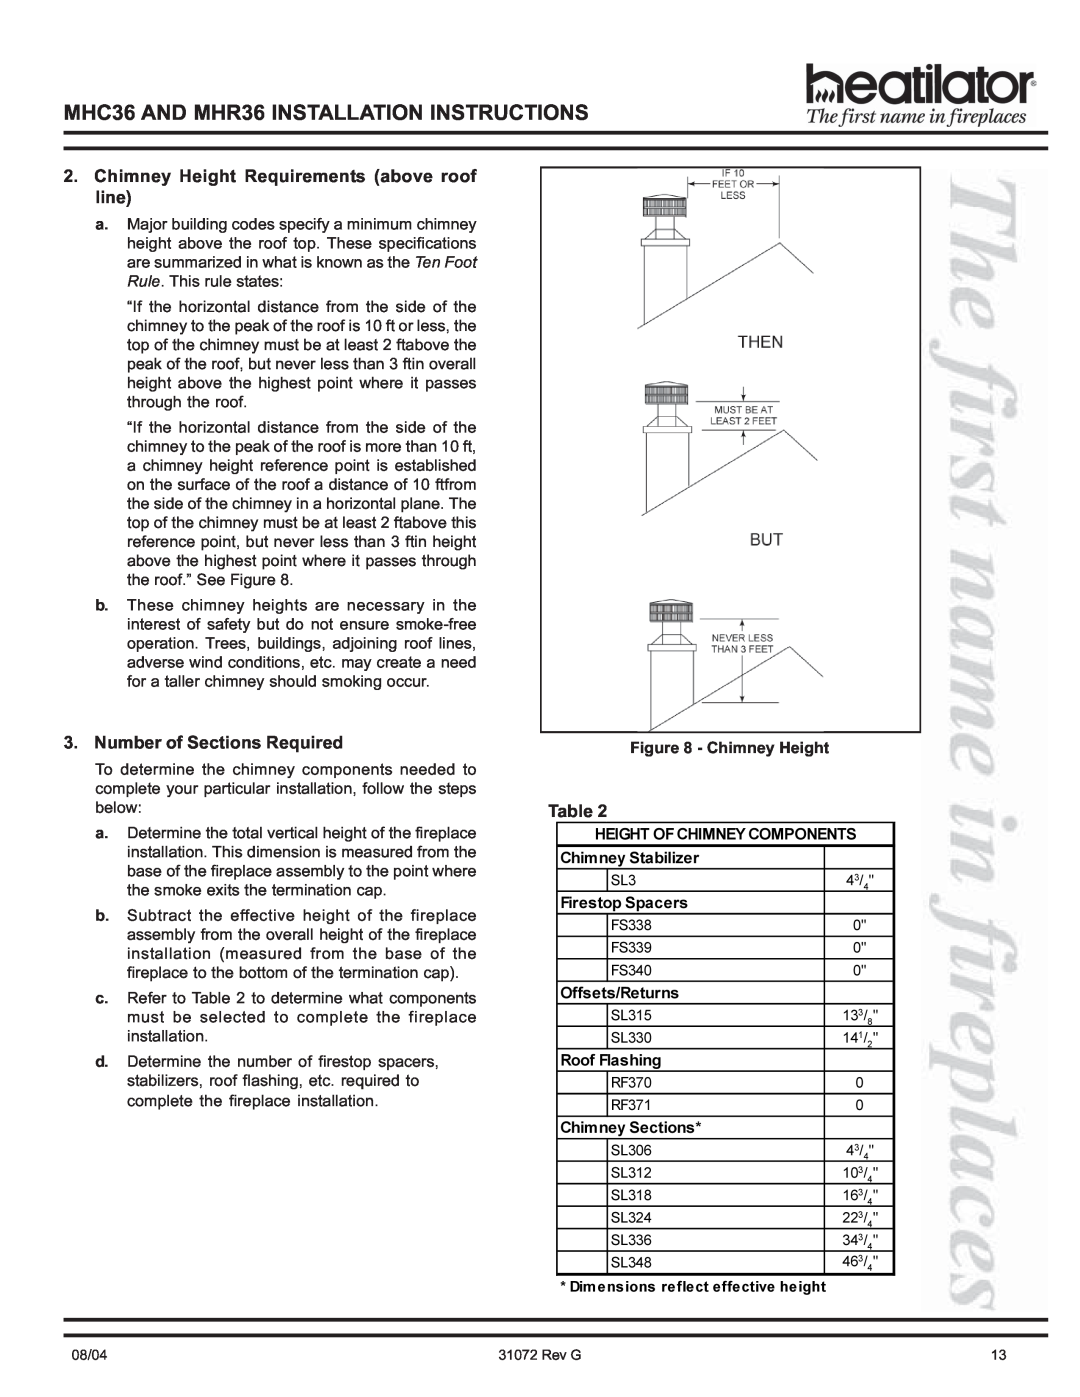 Heart & Home Collectables MHR36, MHC36 manual Chimney Height Requirements above roof line, Number of Sections Required 